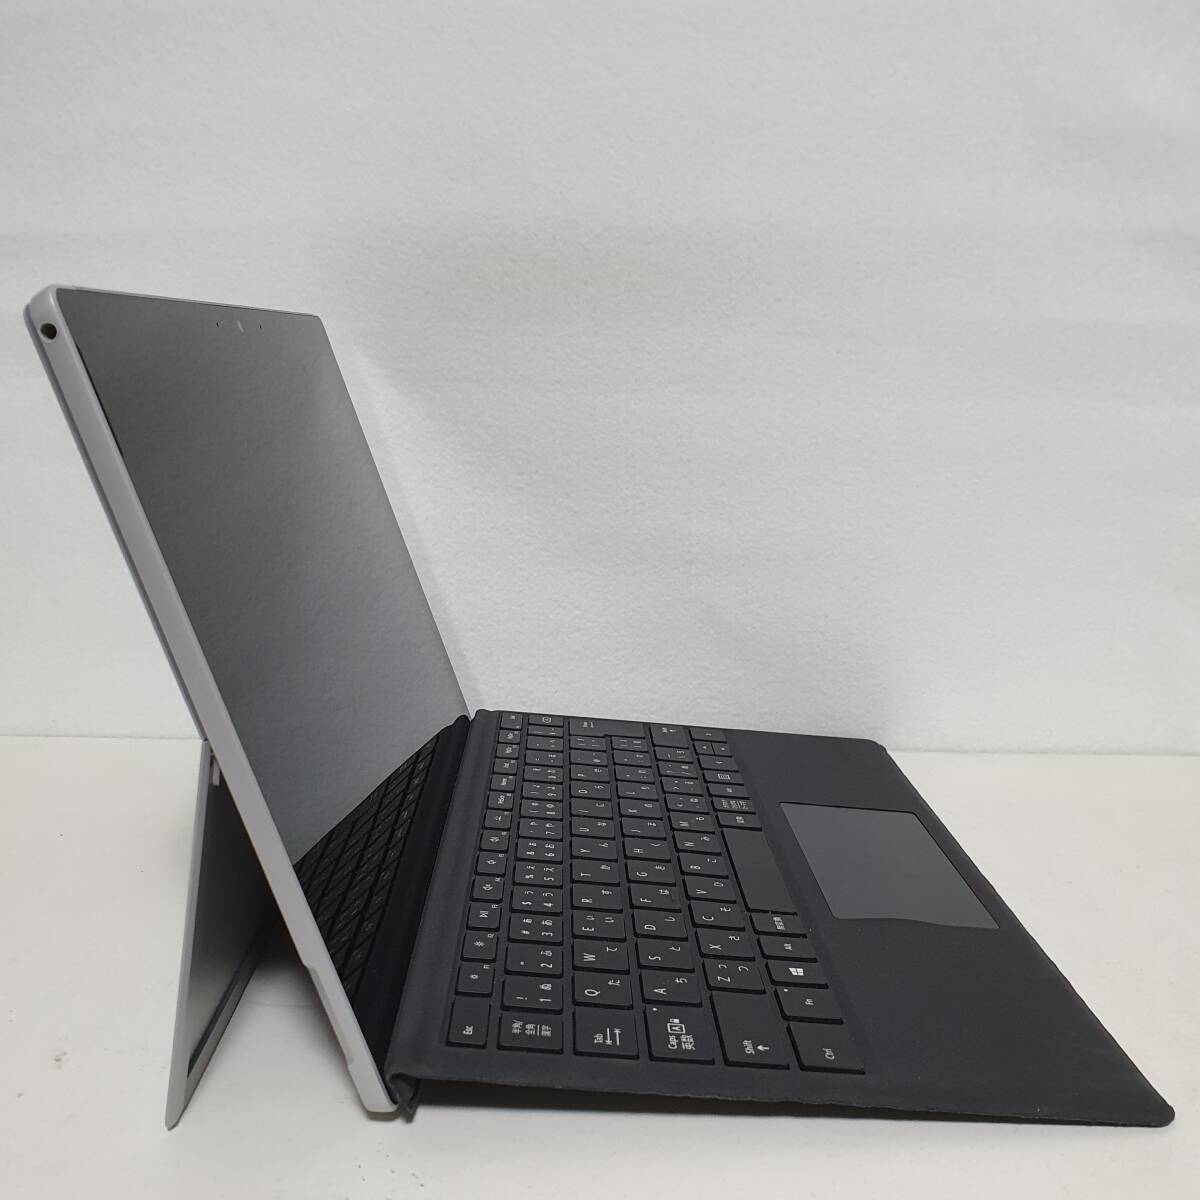 (026439) Surf .s/surface pro7+ / i5-1135G7 2.4Ghz /8GB/SSD 256GB